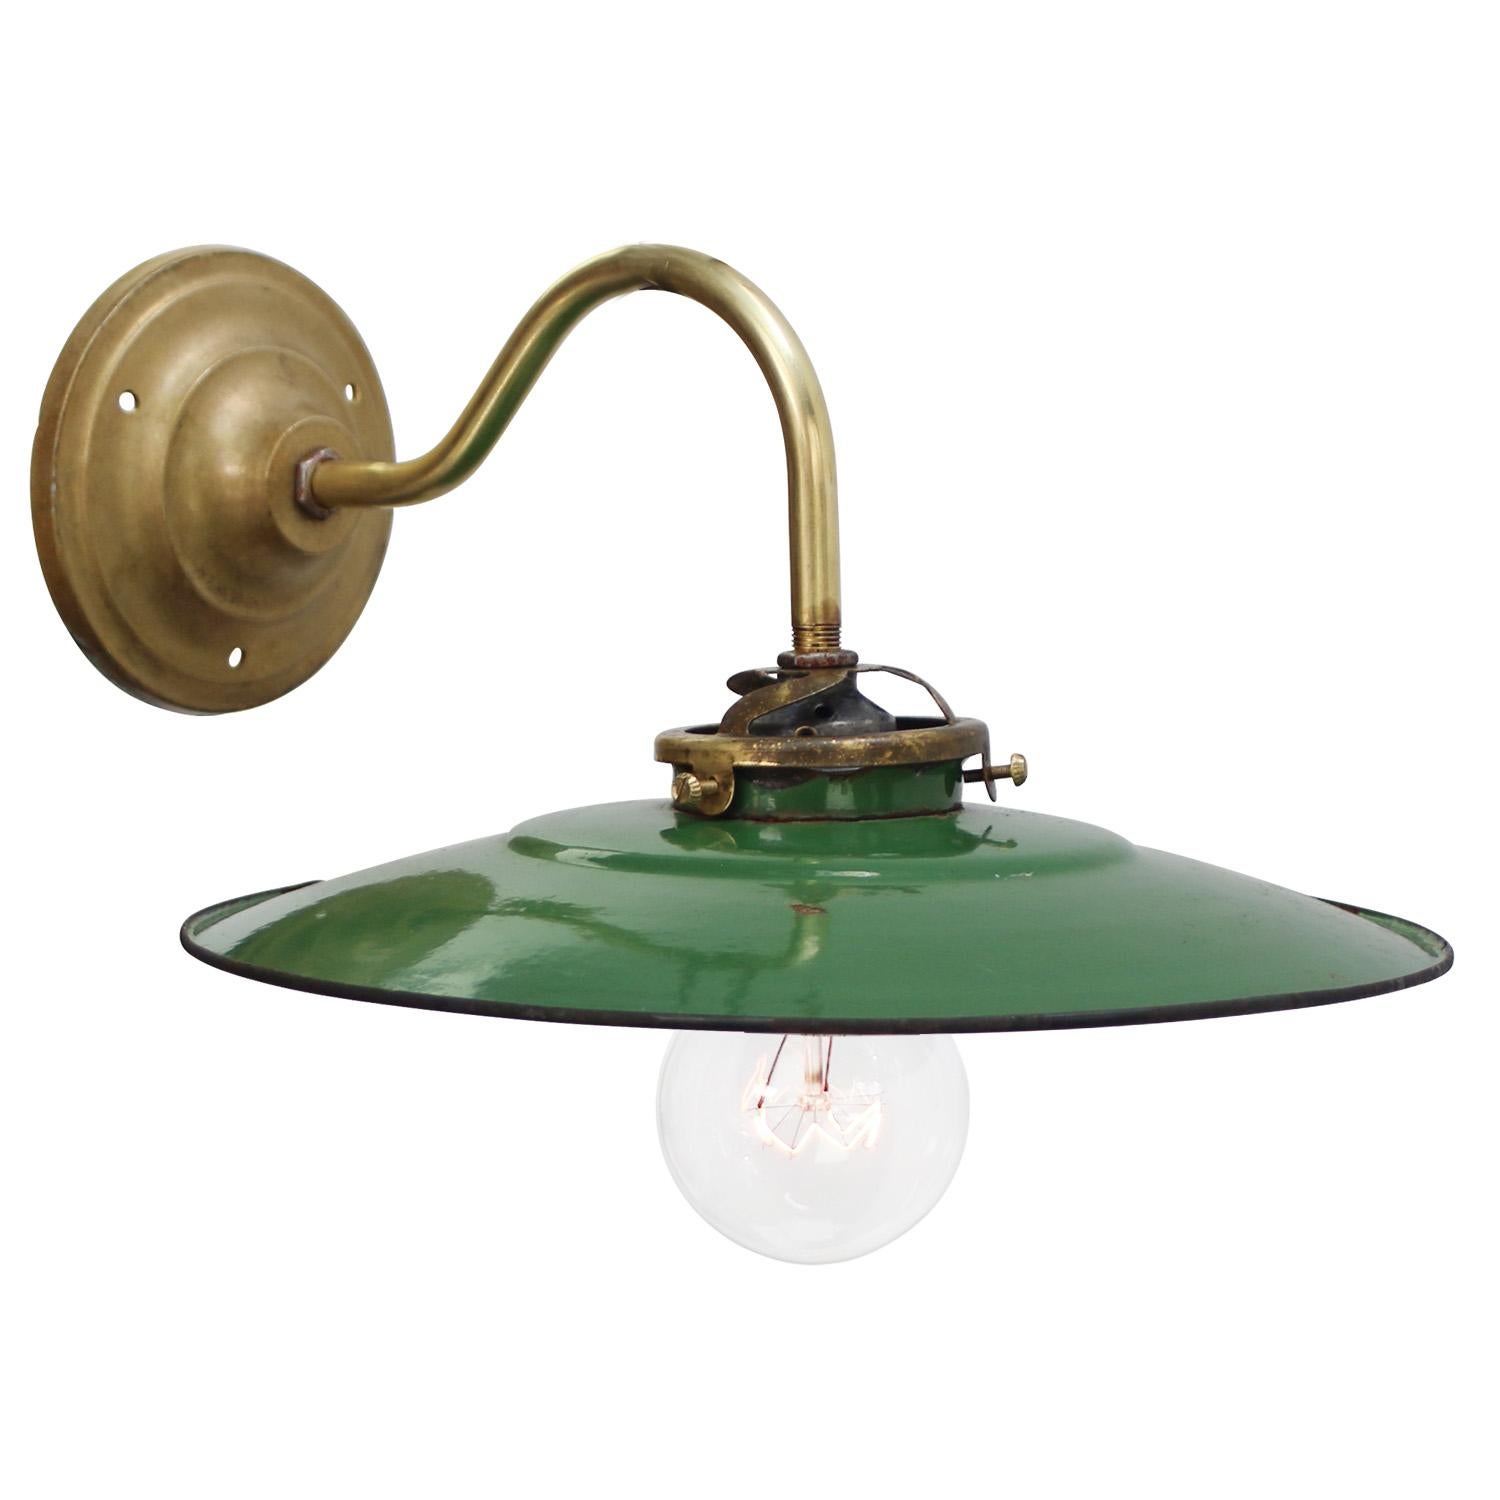 French wall lamp
Green enamel shade
Brass wall piece and arm

diameter brass wall mount: 10 cm, 3 holes to secure

Weight: 0.40 kg / 0.9 lb

Priced per individual item. All lamps have been made suitable by international standards for incandescent